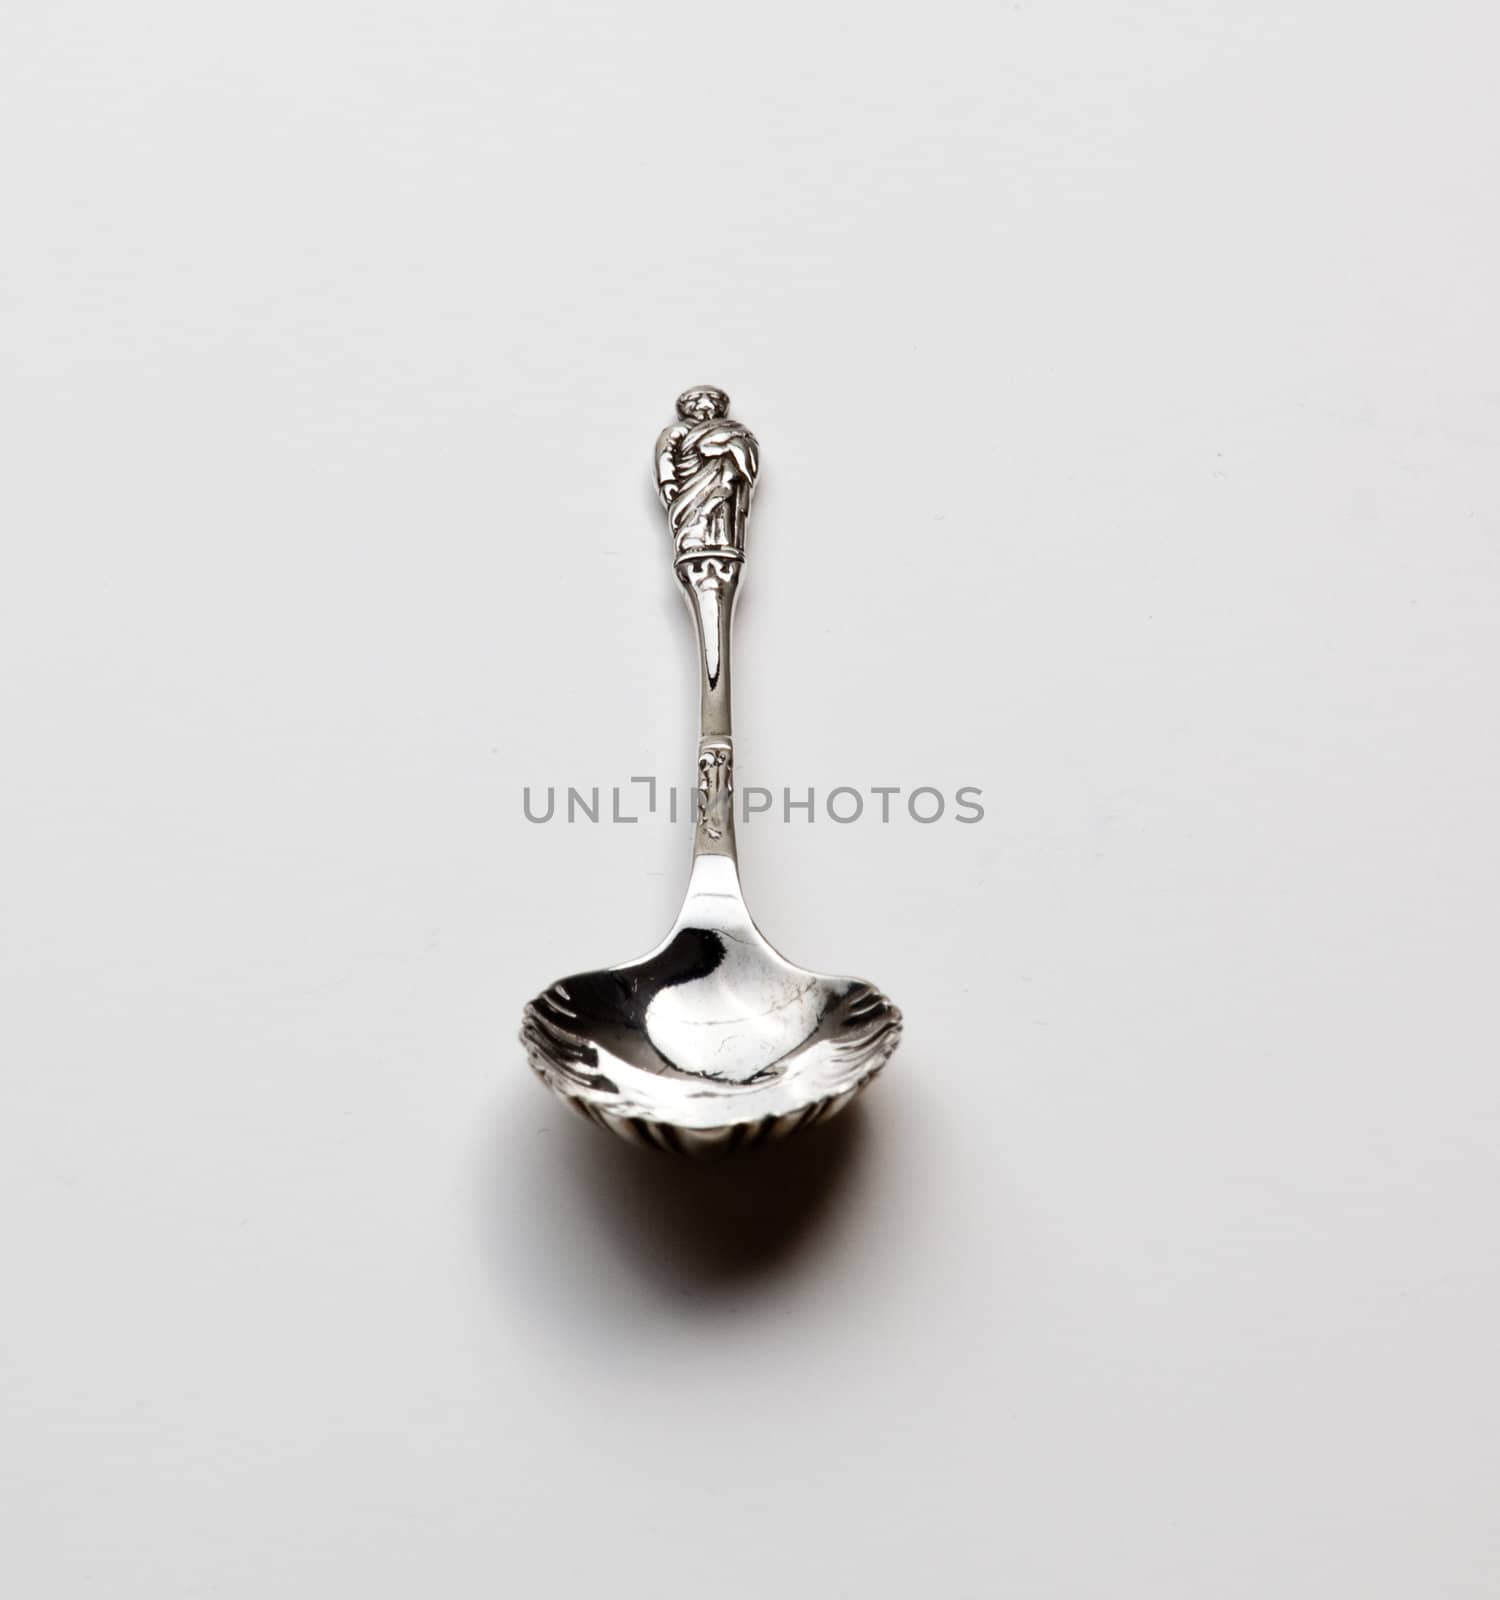 Old fashioned sterling silver object being an apostle statue spoon